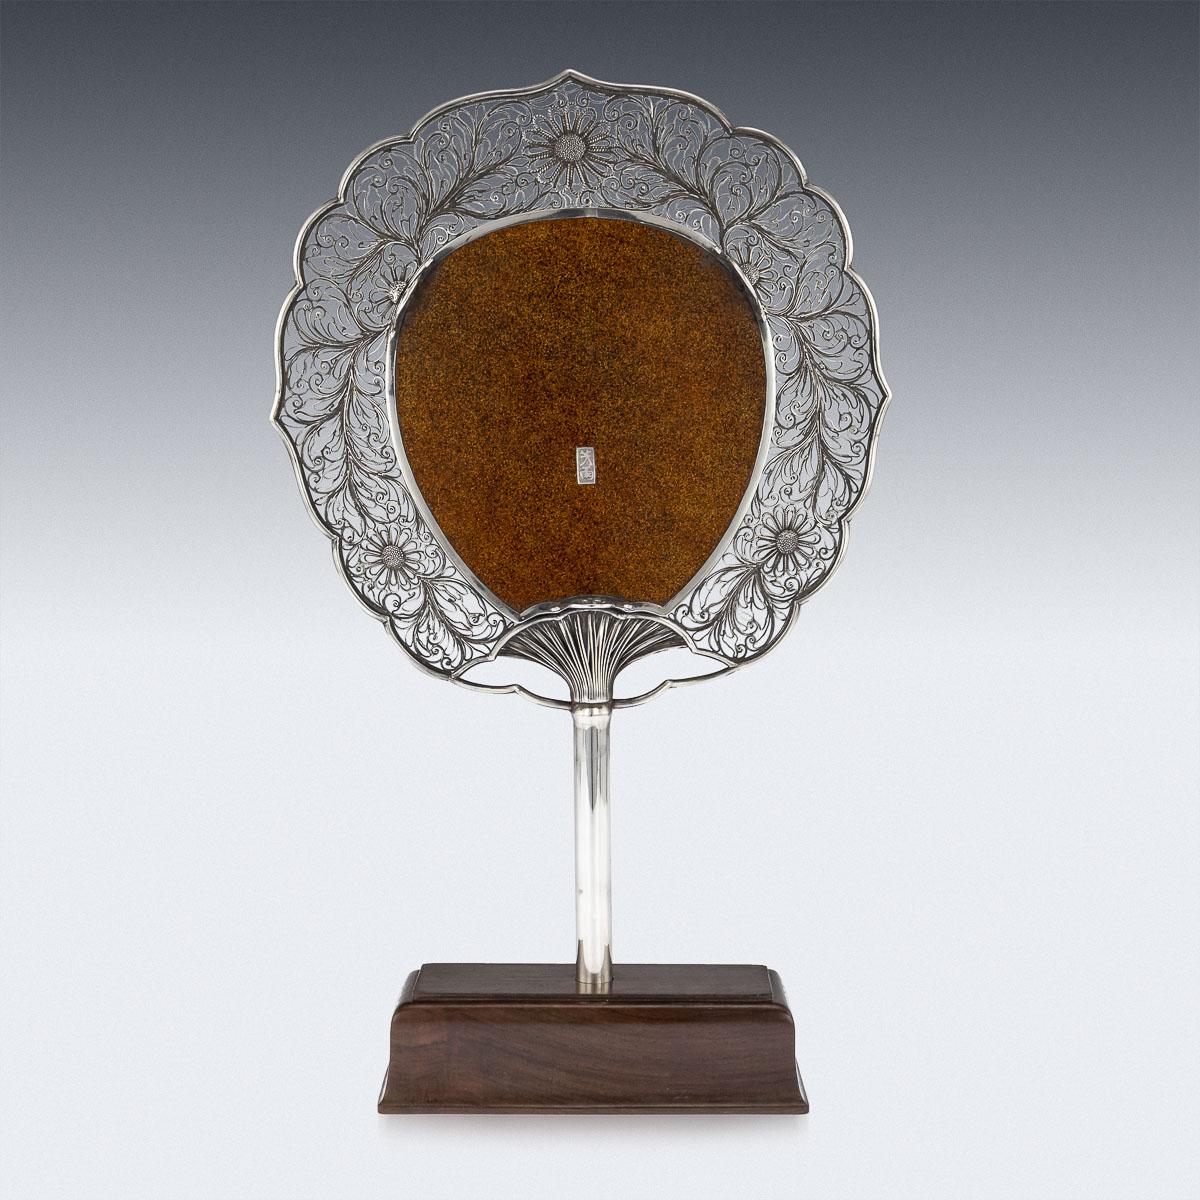 Antique late 19th century Japanese Meiji period solid silver mounted shibayama fan on stand. Of traditional Japanese fan-shape, with a central gold lacquer roundel inlaid in mother of pearl and coral with a three beautiful geisha dancing, playing